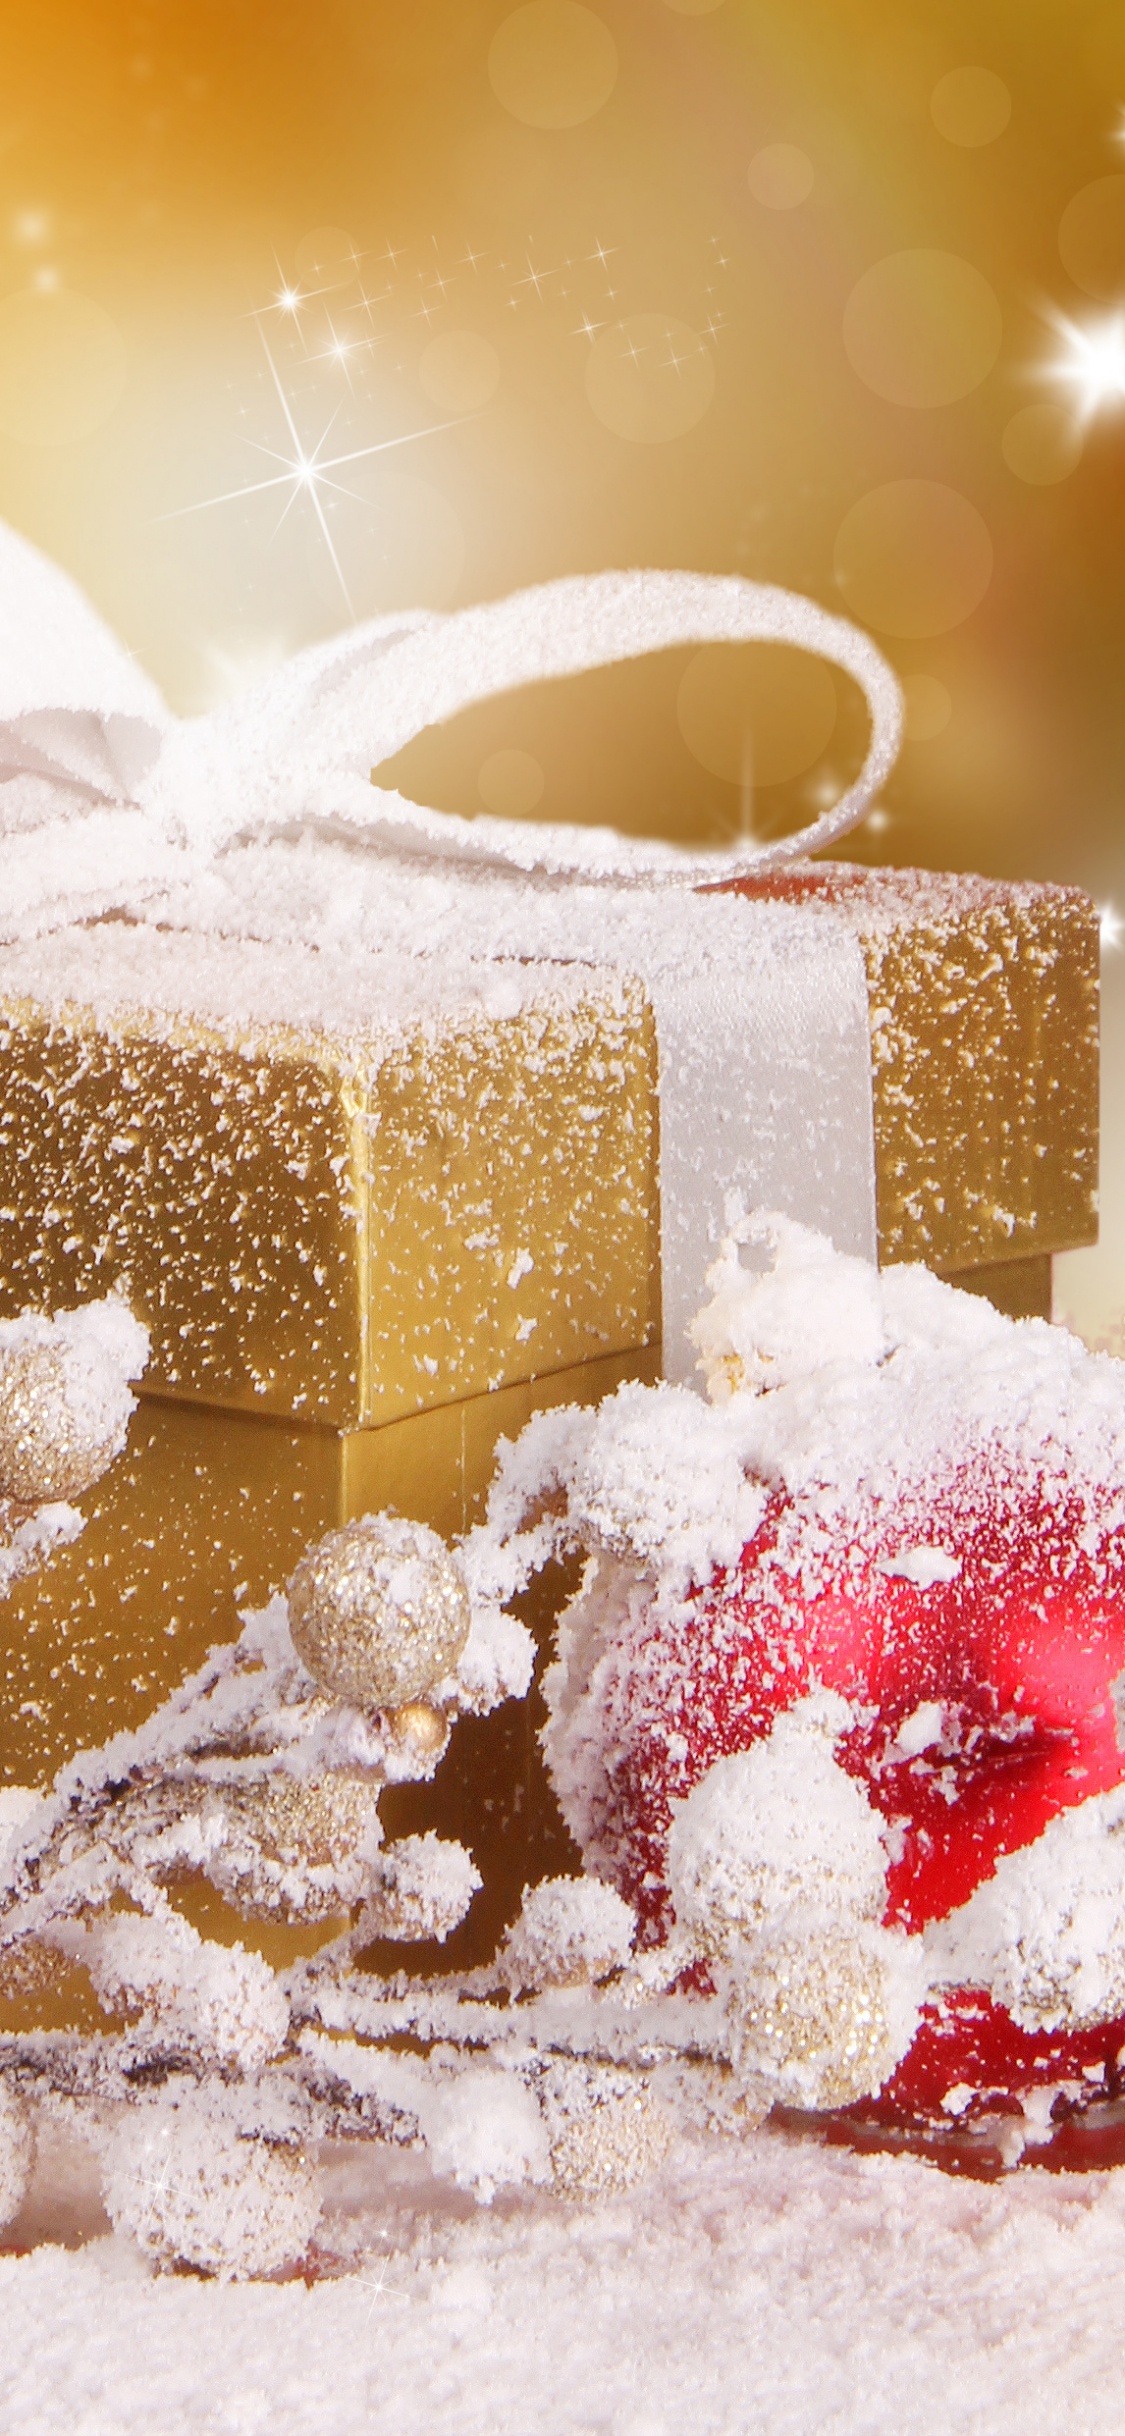 Gift, Christmas Gift, Christmas Day, Present, Food. Wallpaper in 1125x2436 Resolution